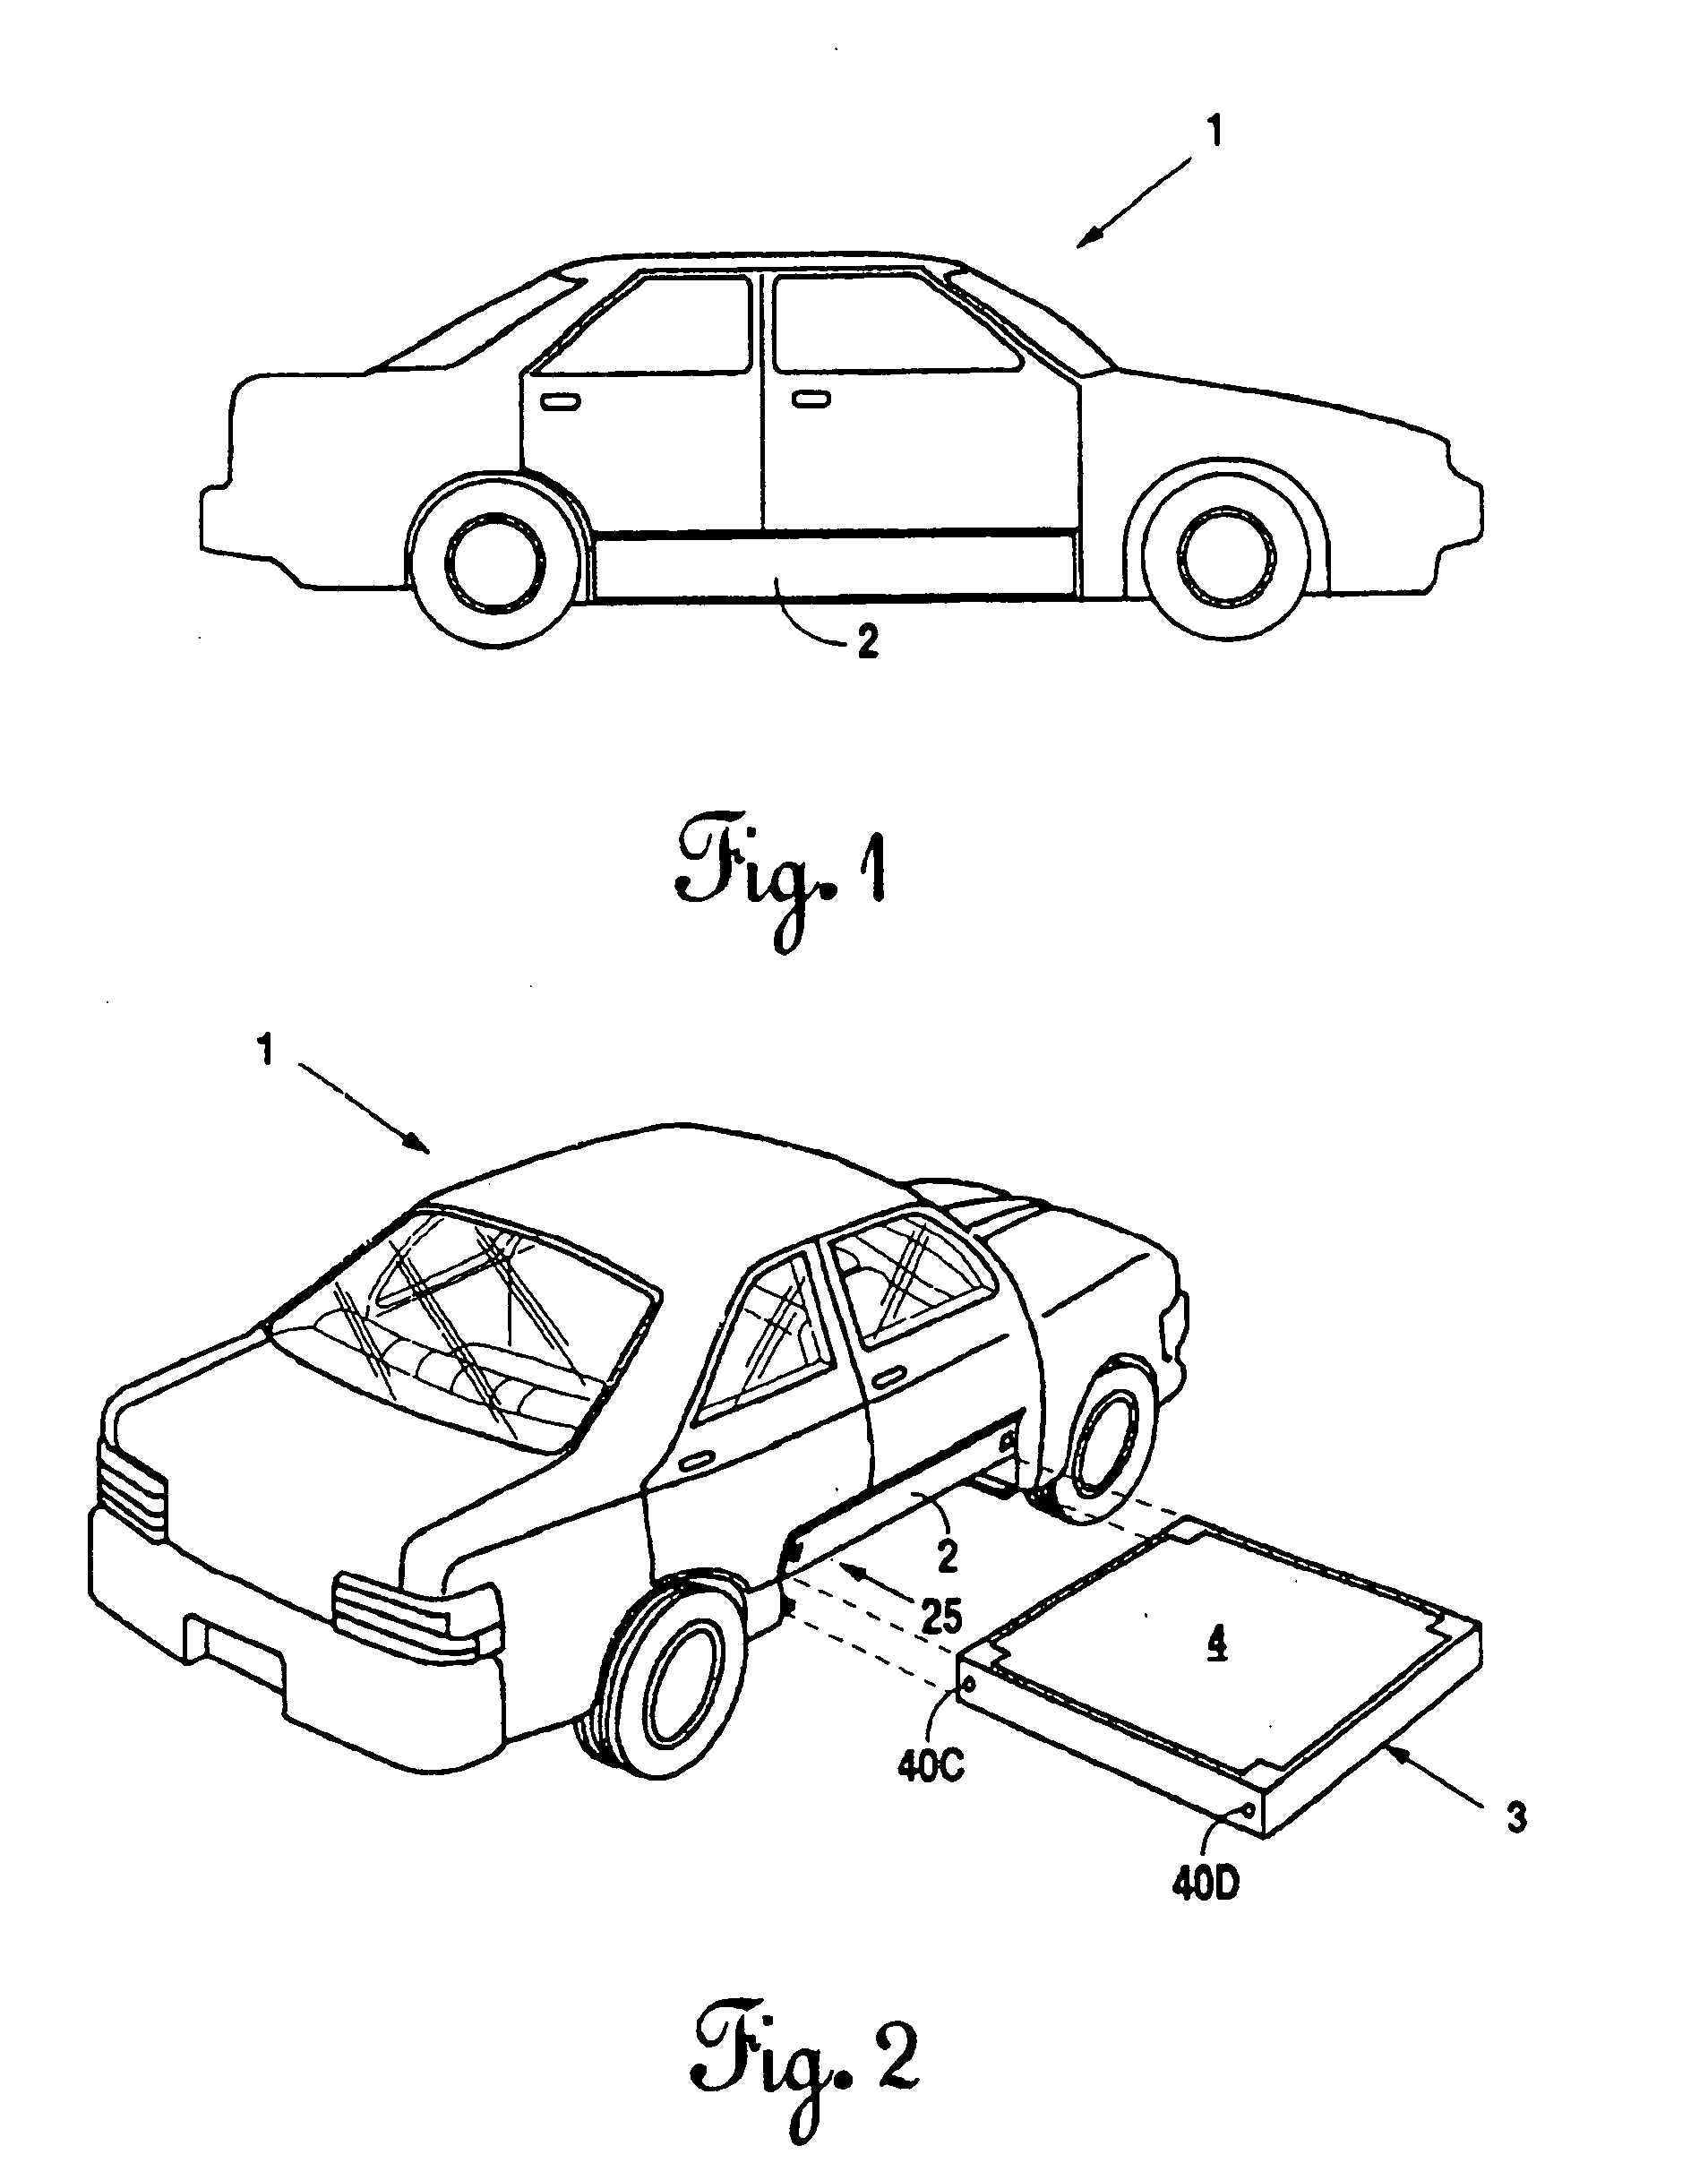 Hybrid electric vehicle chassis with removable battery module